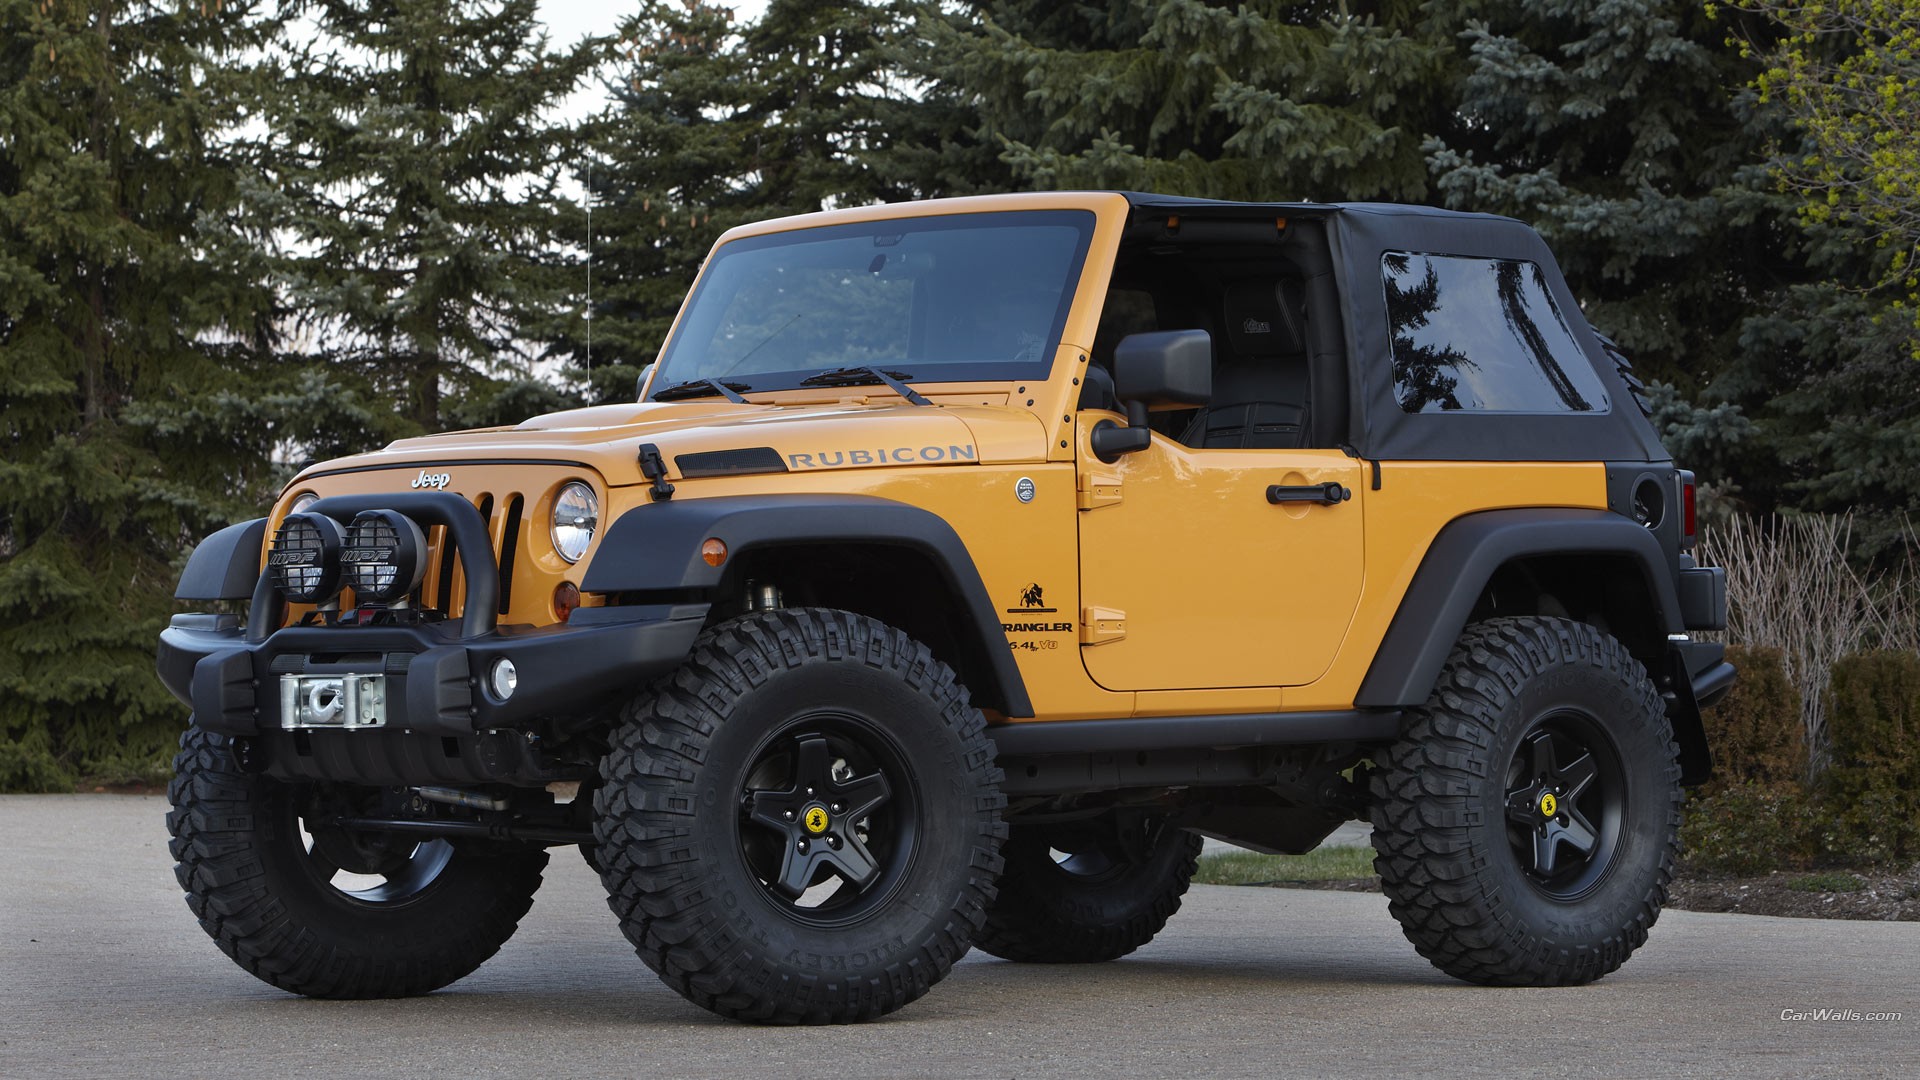 General 1920x1080 Jeep Wrangler Jeep car vehicle yellow cars American cars offroad Stellantis